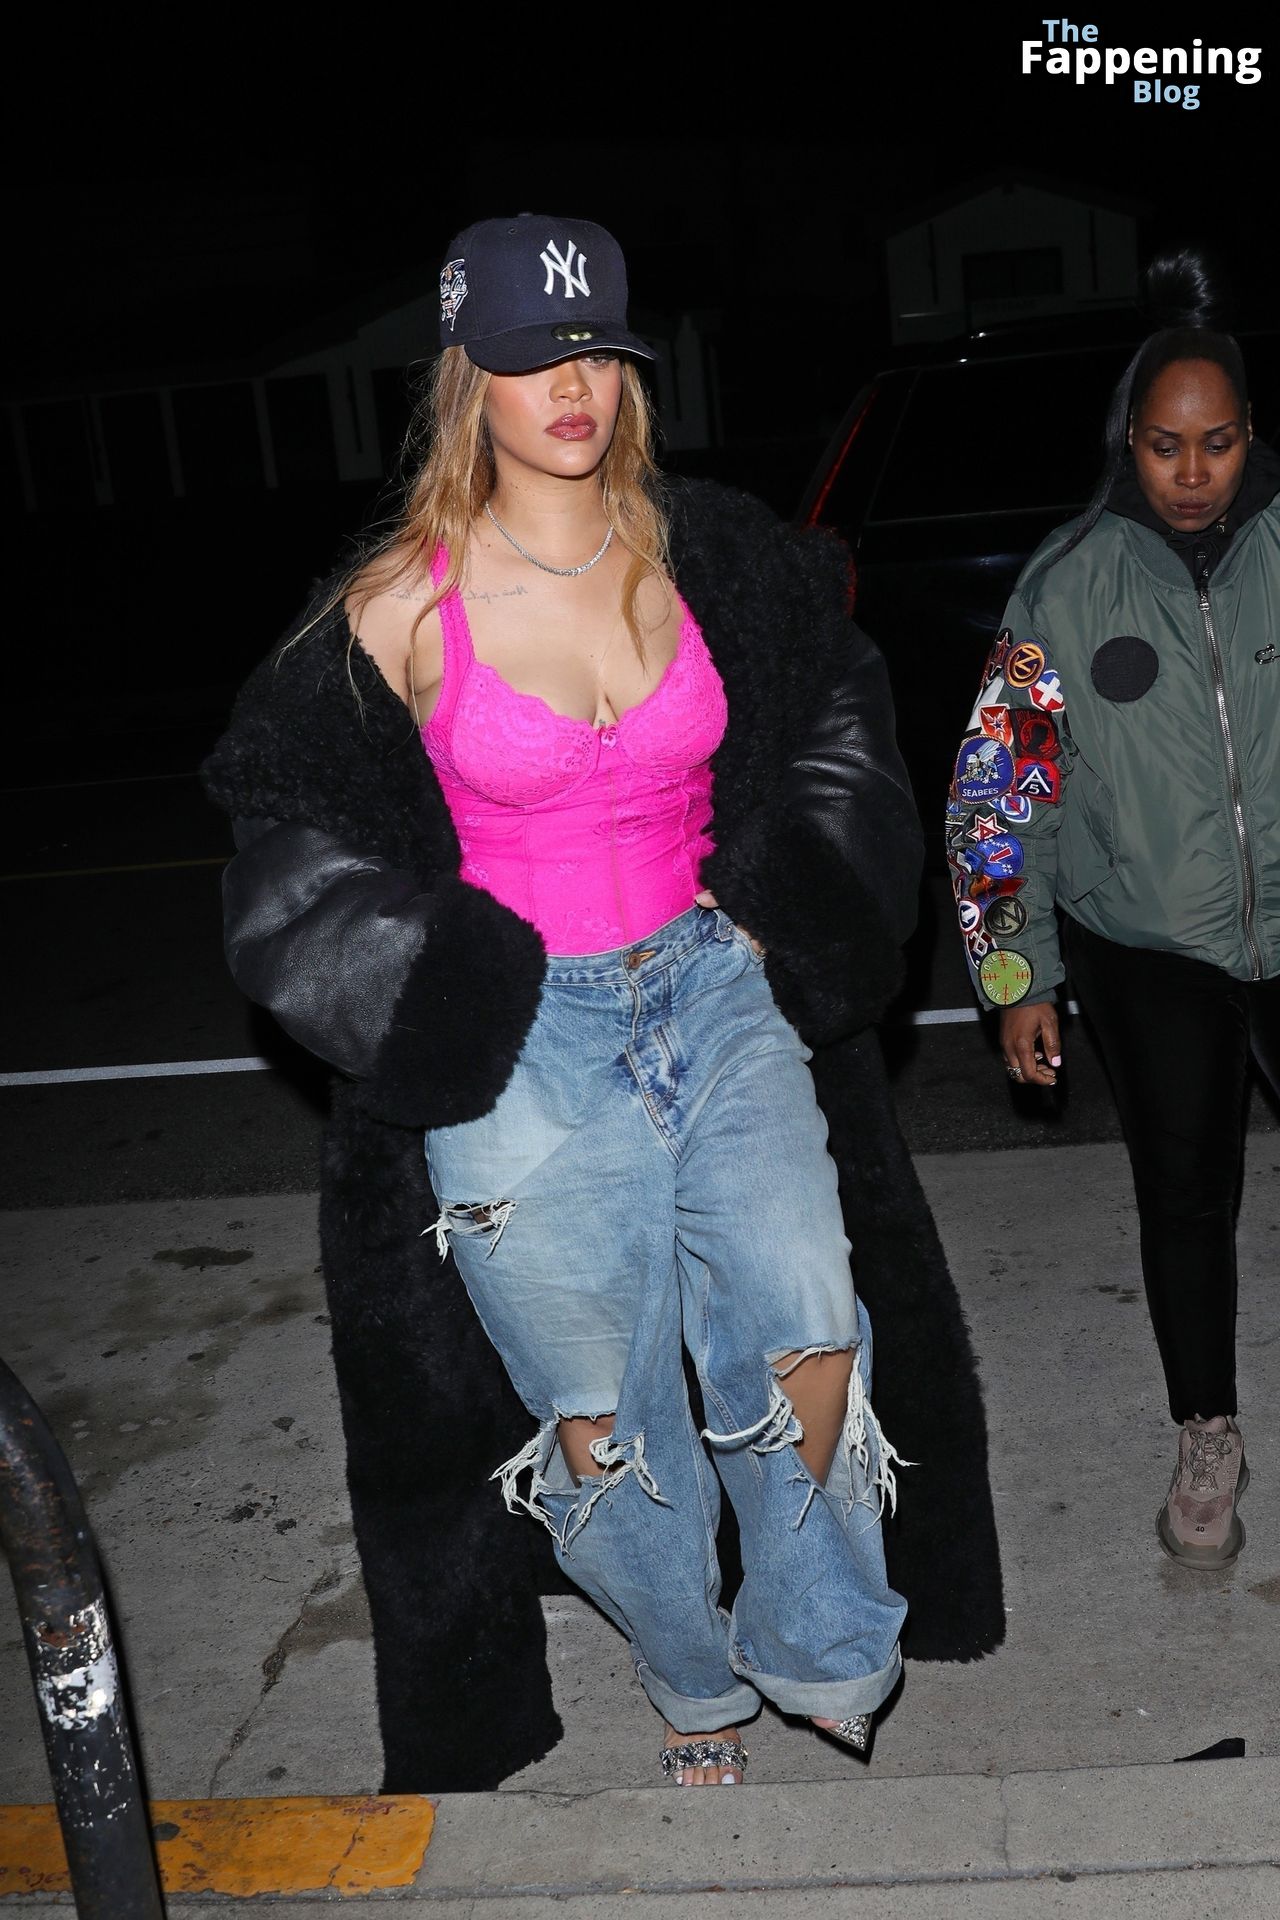 Rihanna is Quite the Fashionista Stepping Out for Dinner with Friends at Giorgio Baldi (148 Photos)